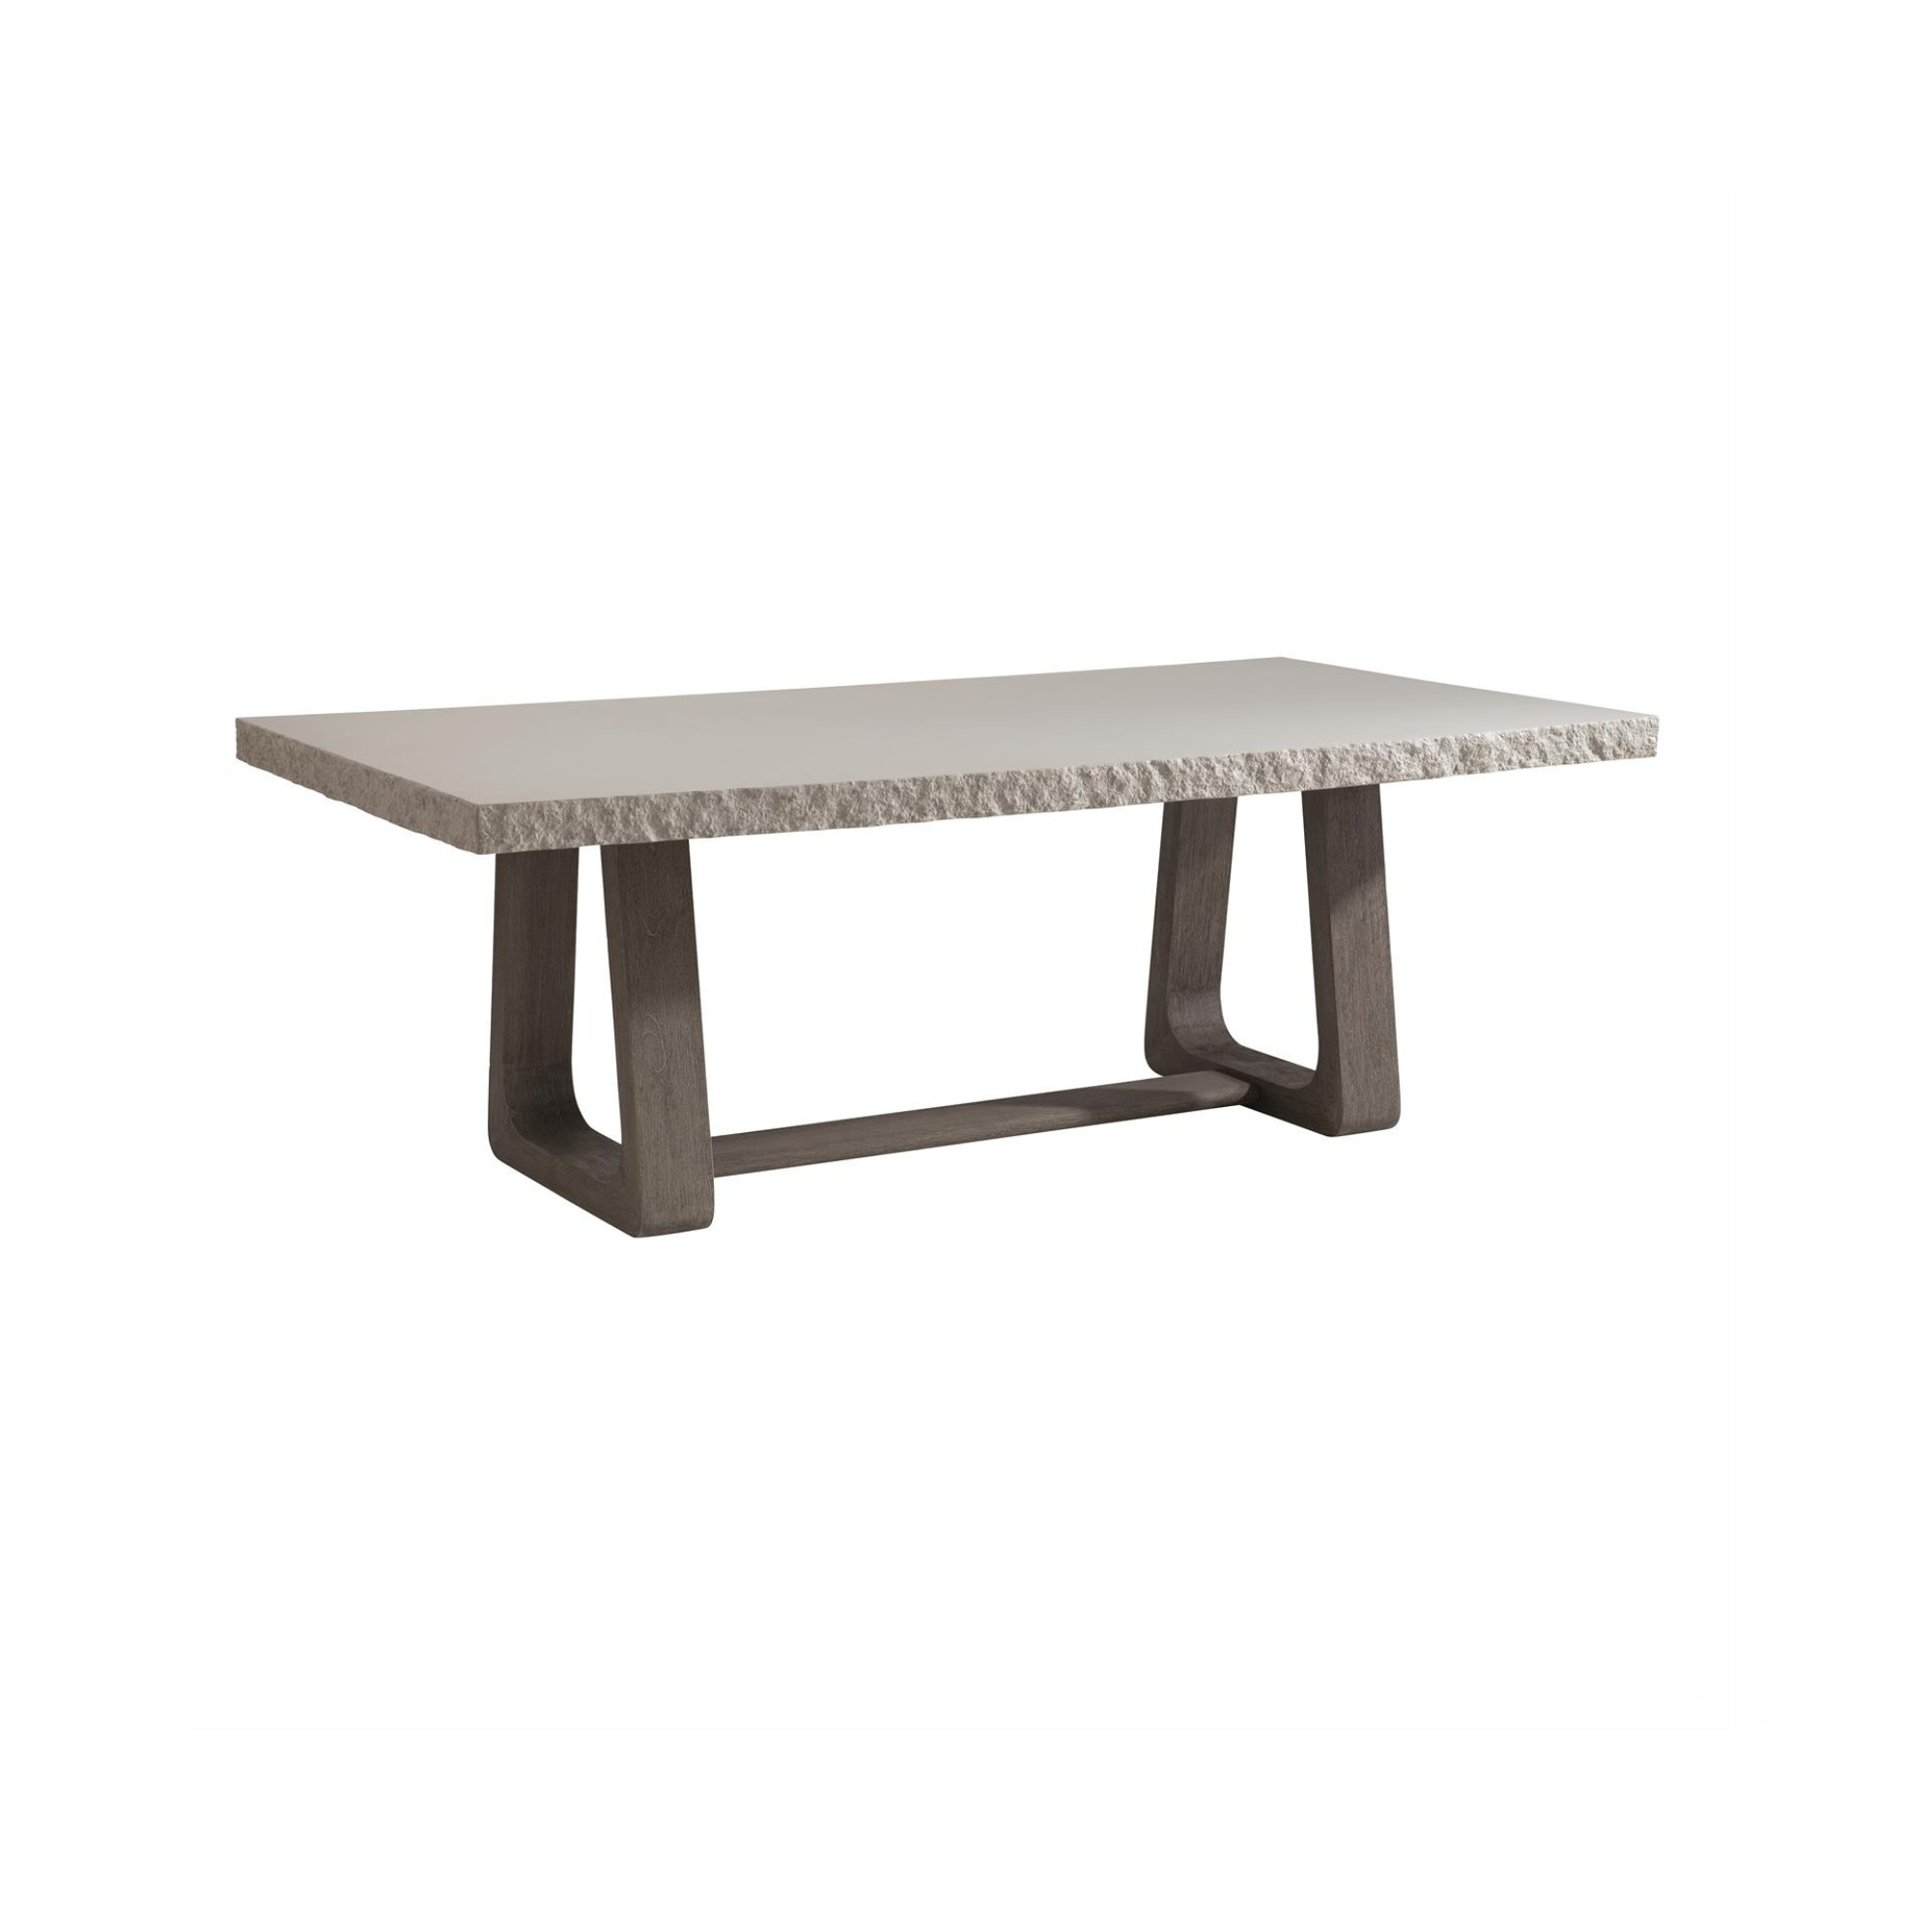 Theodora Outdoor Dining Table